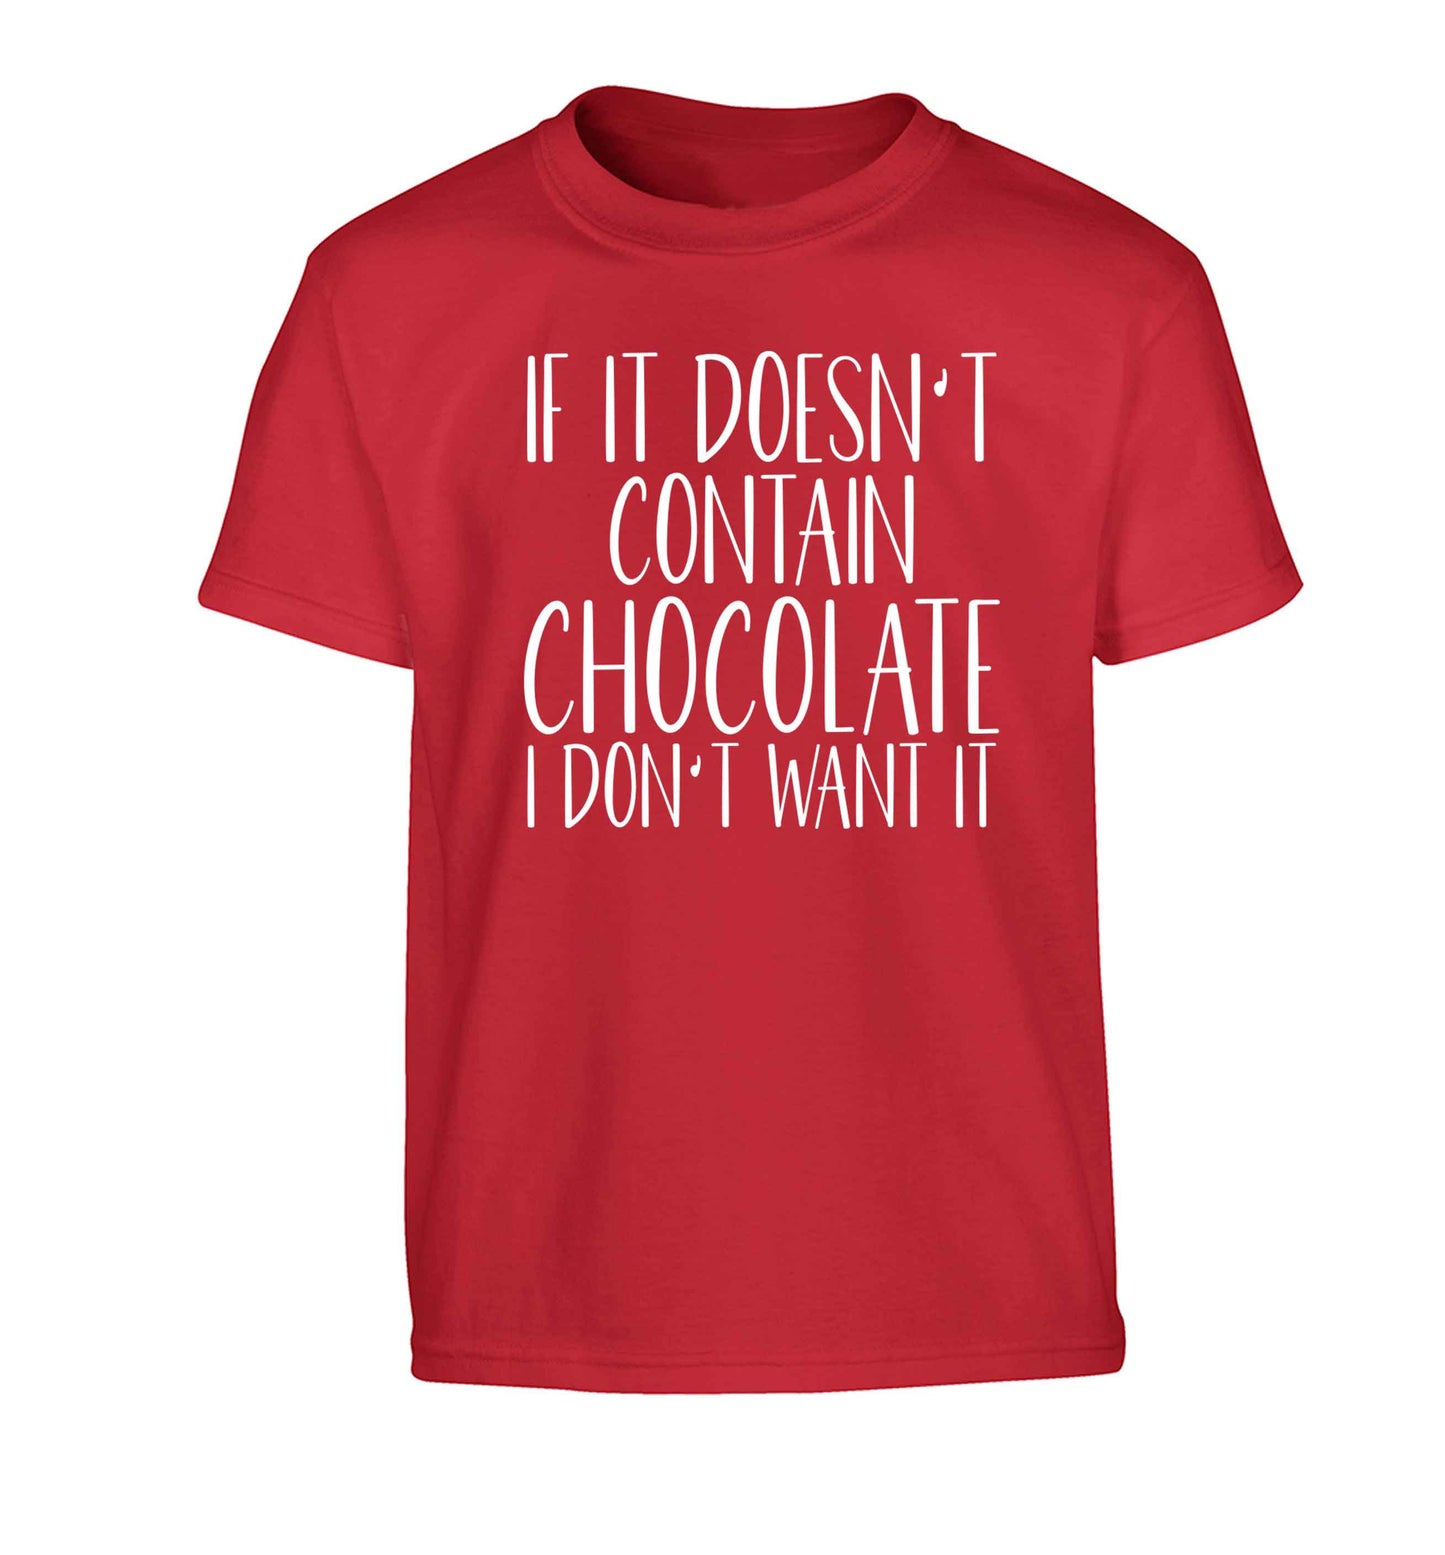 If it doesn't contain chocolate I don't want it Children's red Tshirt 12-13 Years